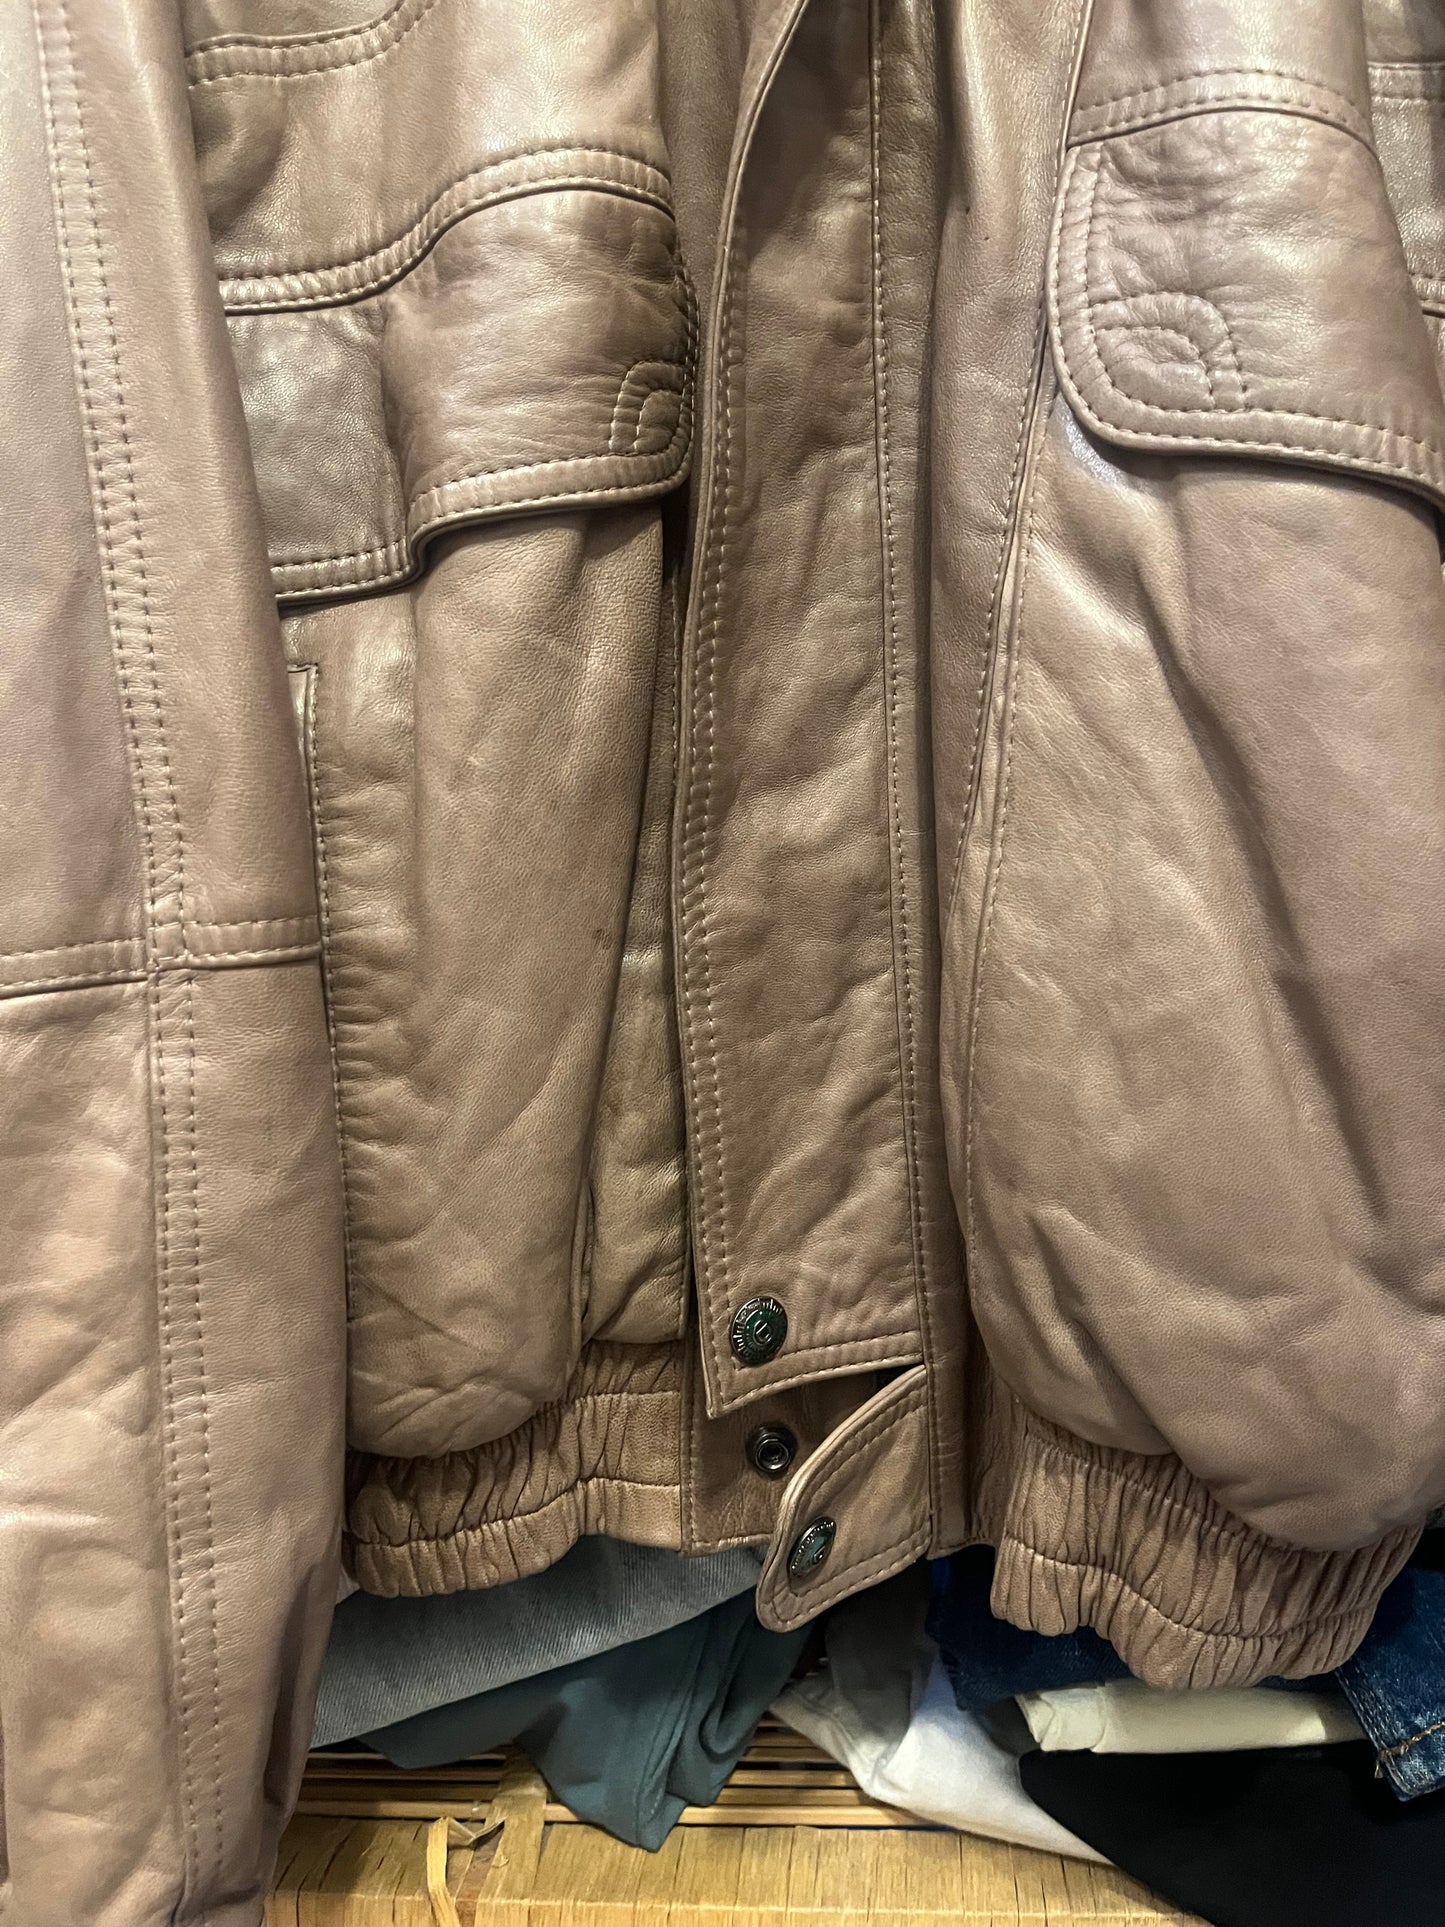 90s zip up genuine leather jacket .Fits S-L depending on desired suit .